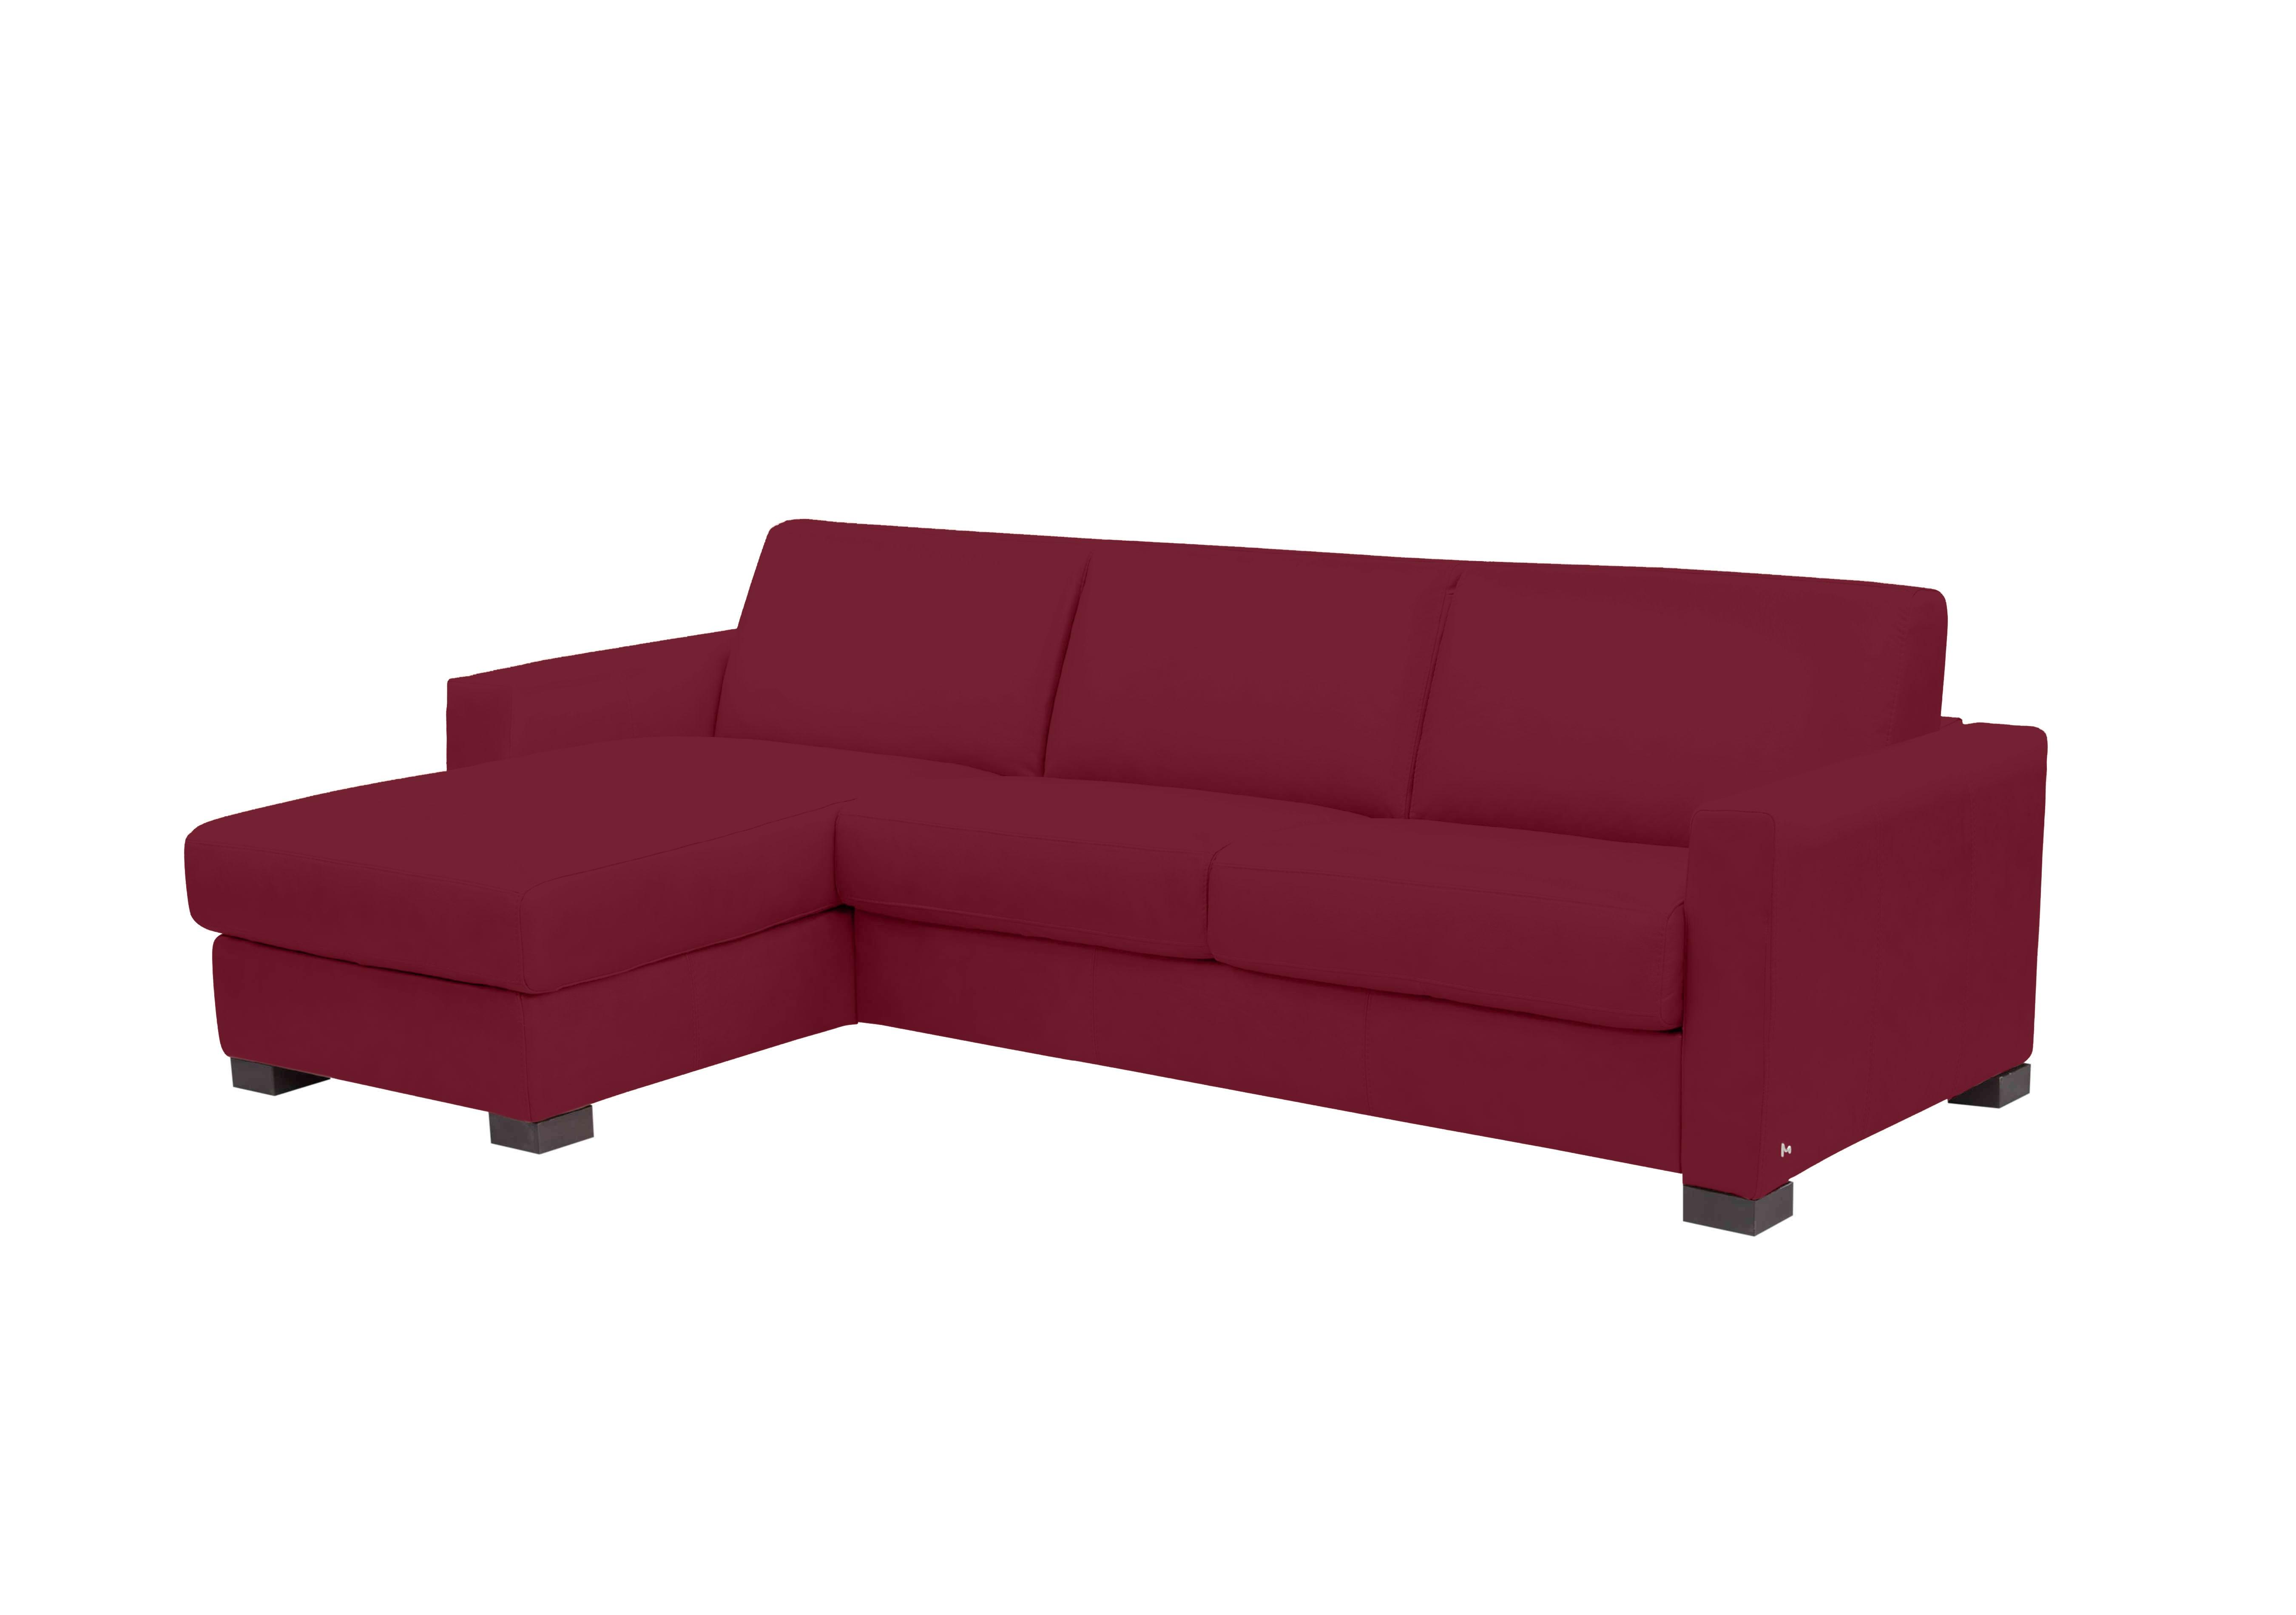 Alcova 3 Seater Leather Sofa Bed with Storage Chaise and Box Arms in Dali Bordeaux 1521 on Furniture Village